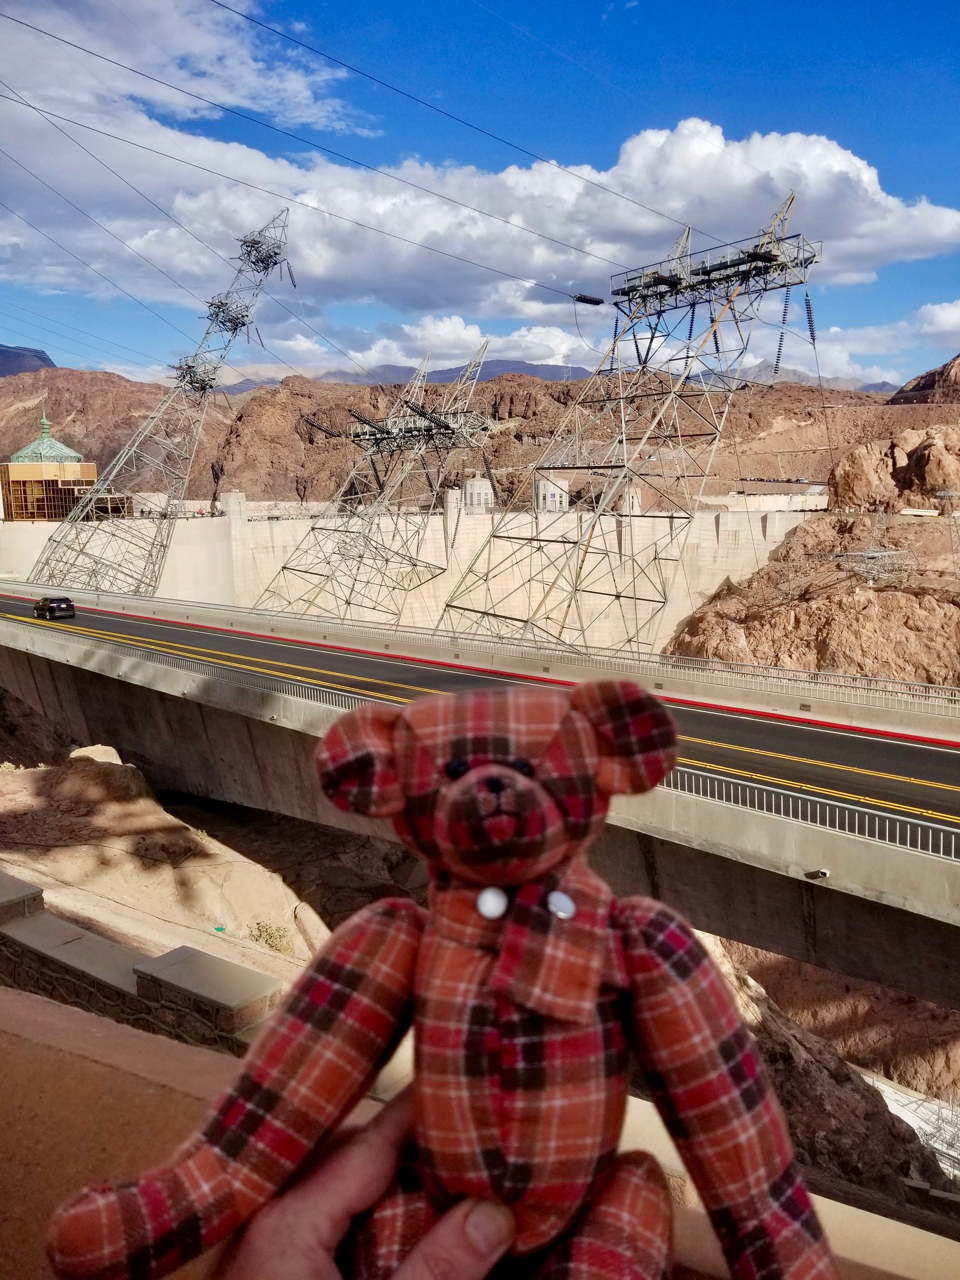 Hover dam stop